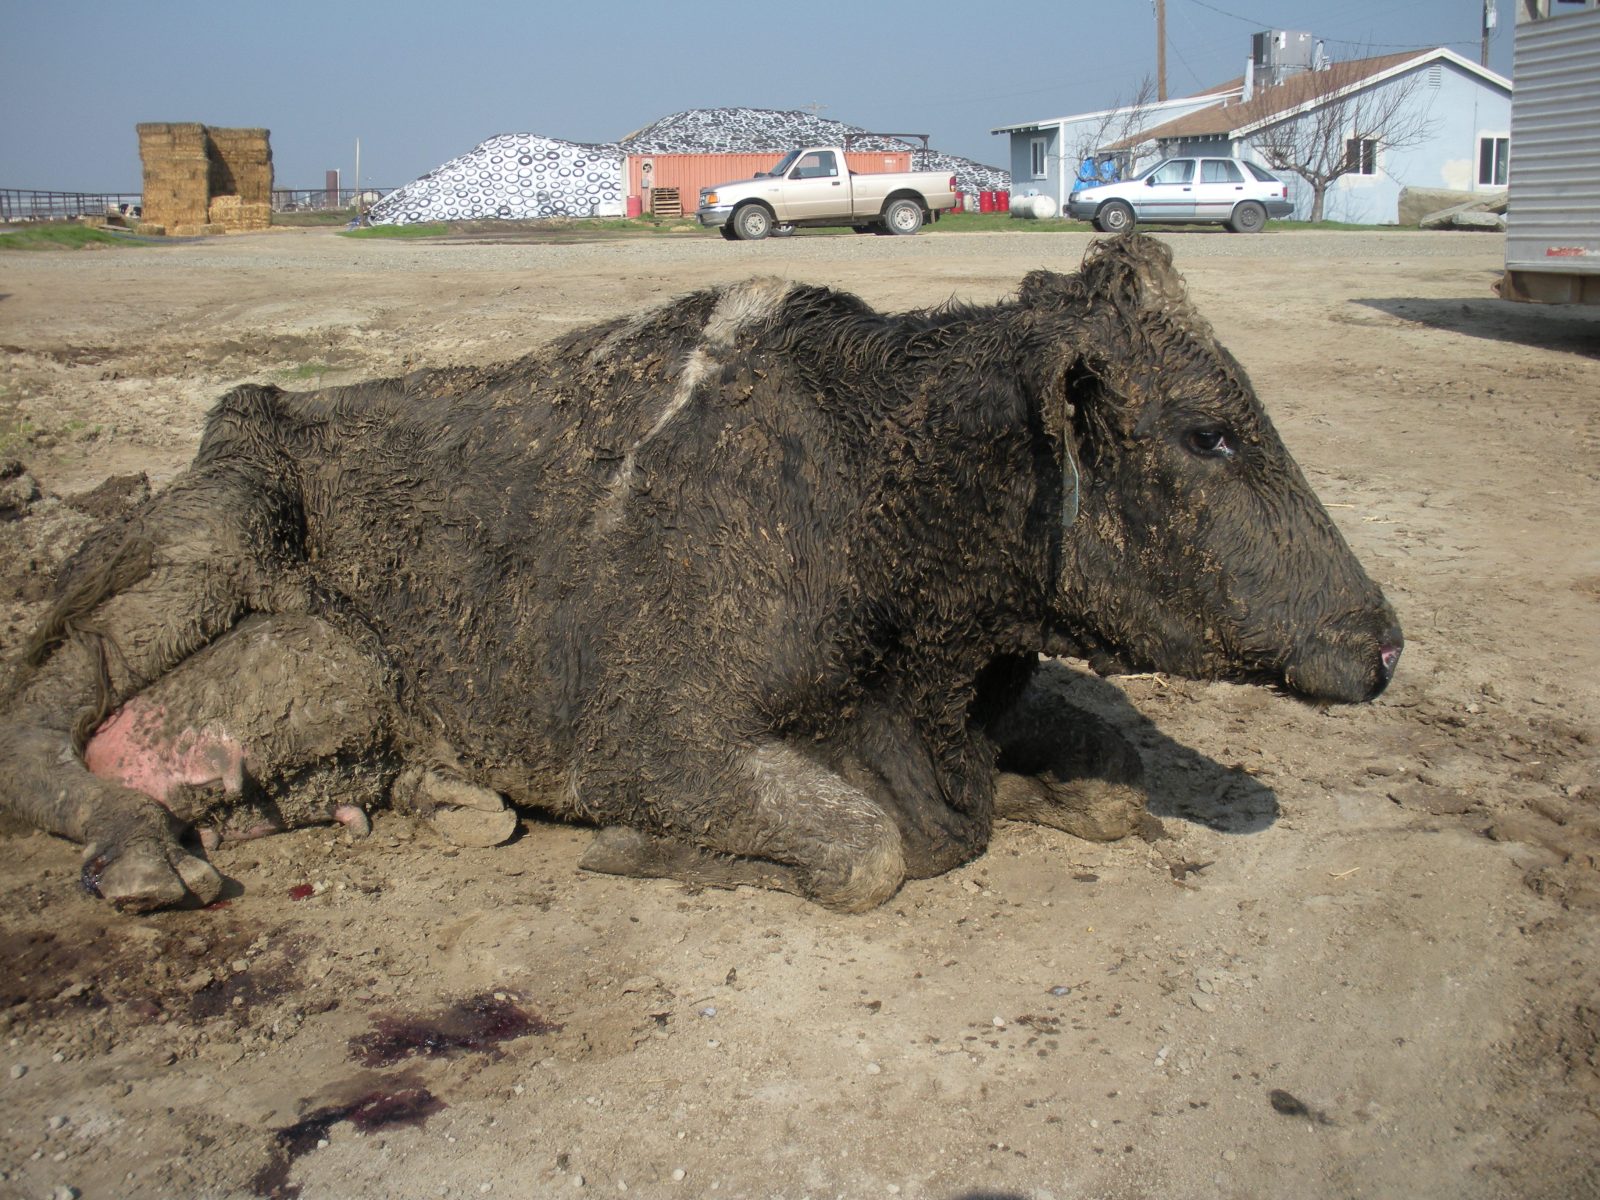 A downed cow in California.